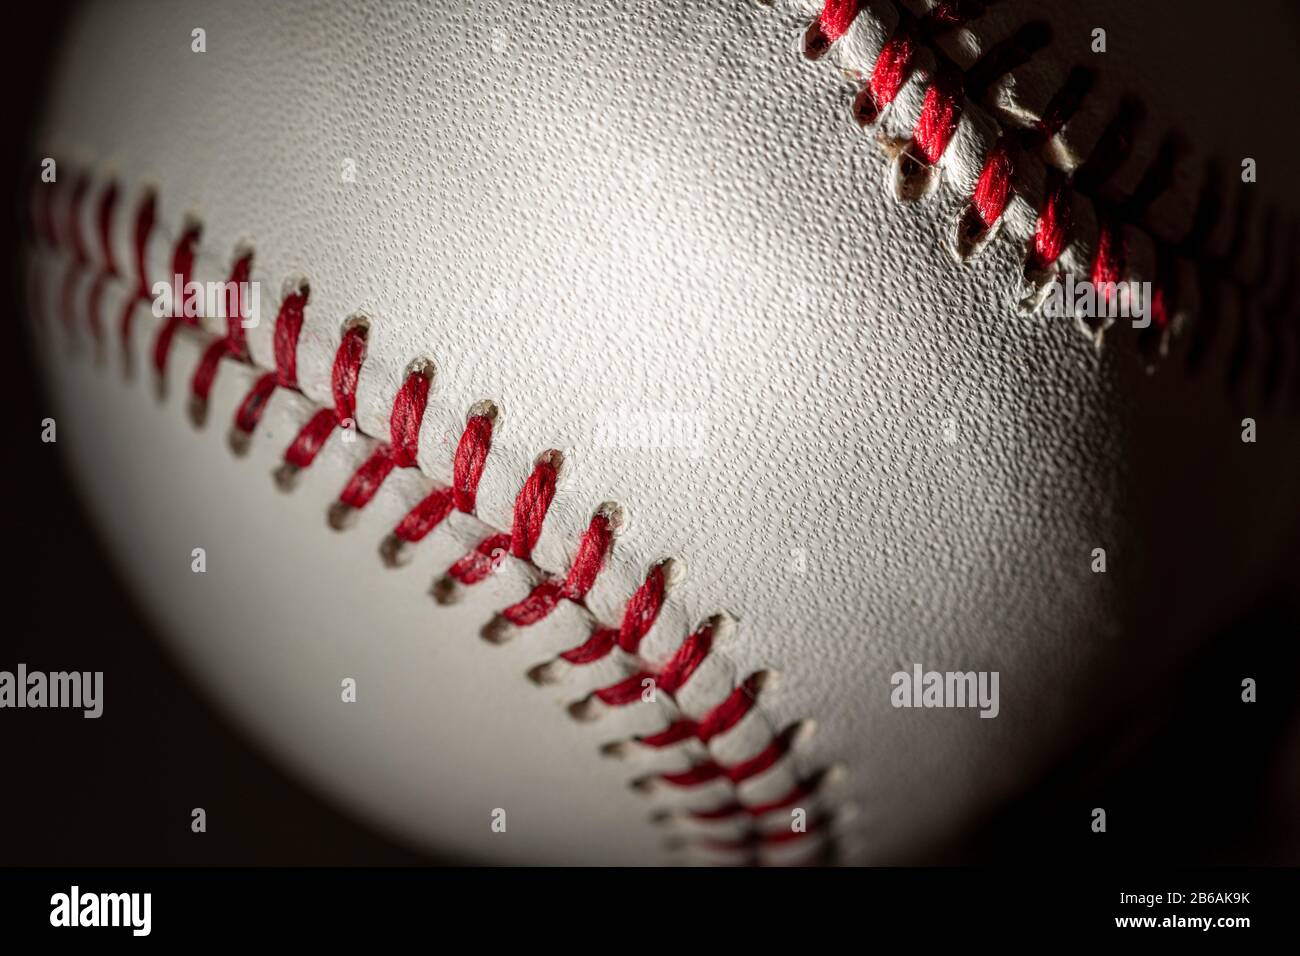 A white leather baseball on a black background Stock Photo